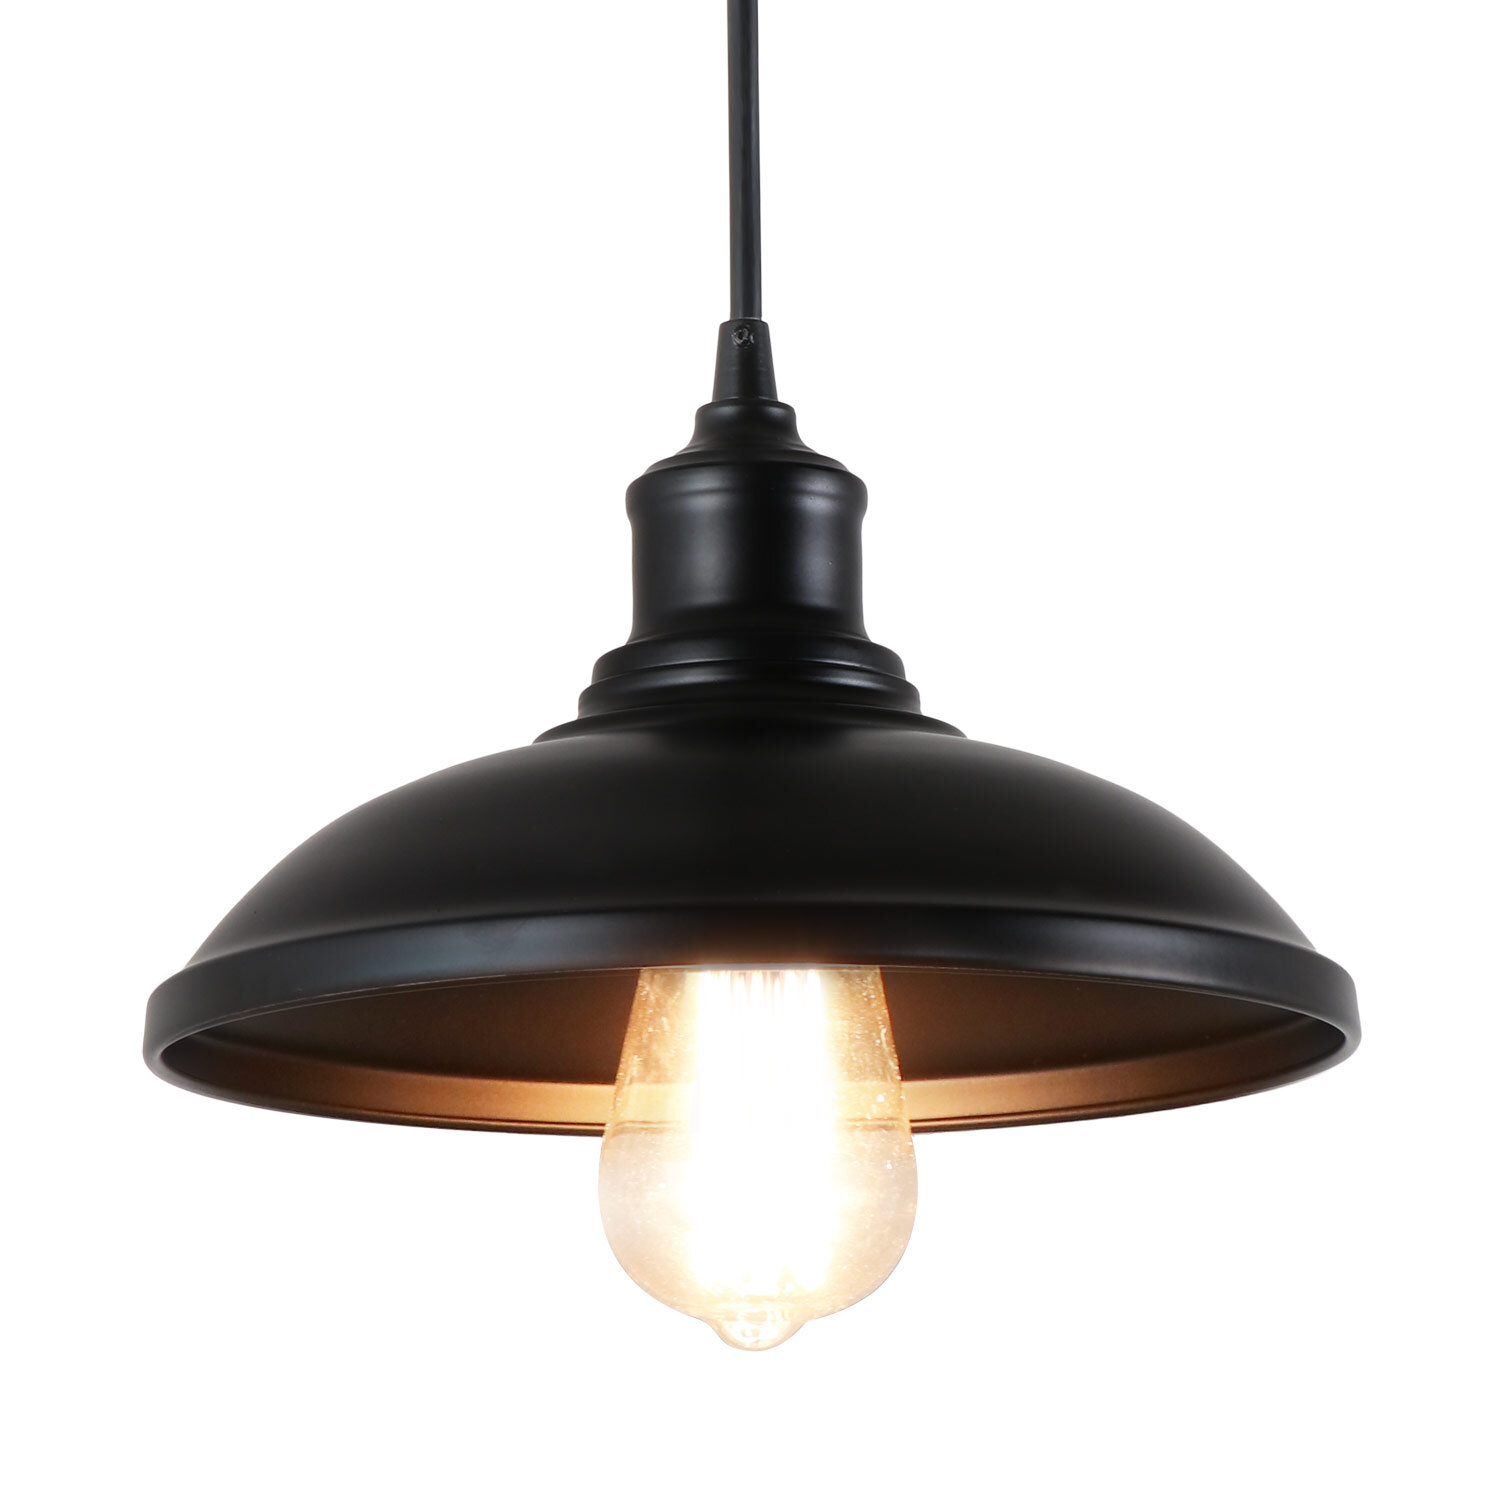 Details about   Rustic Pulley Pendant Light Industrial Black Ceiling Hanging Indoor Island Lamp 